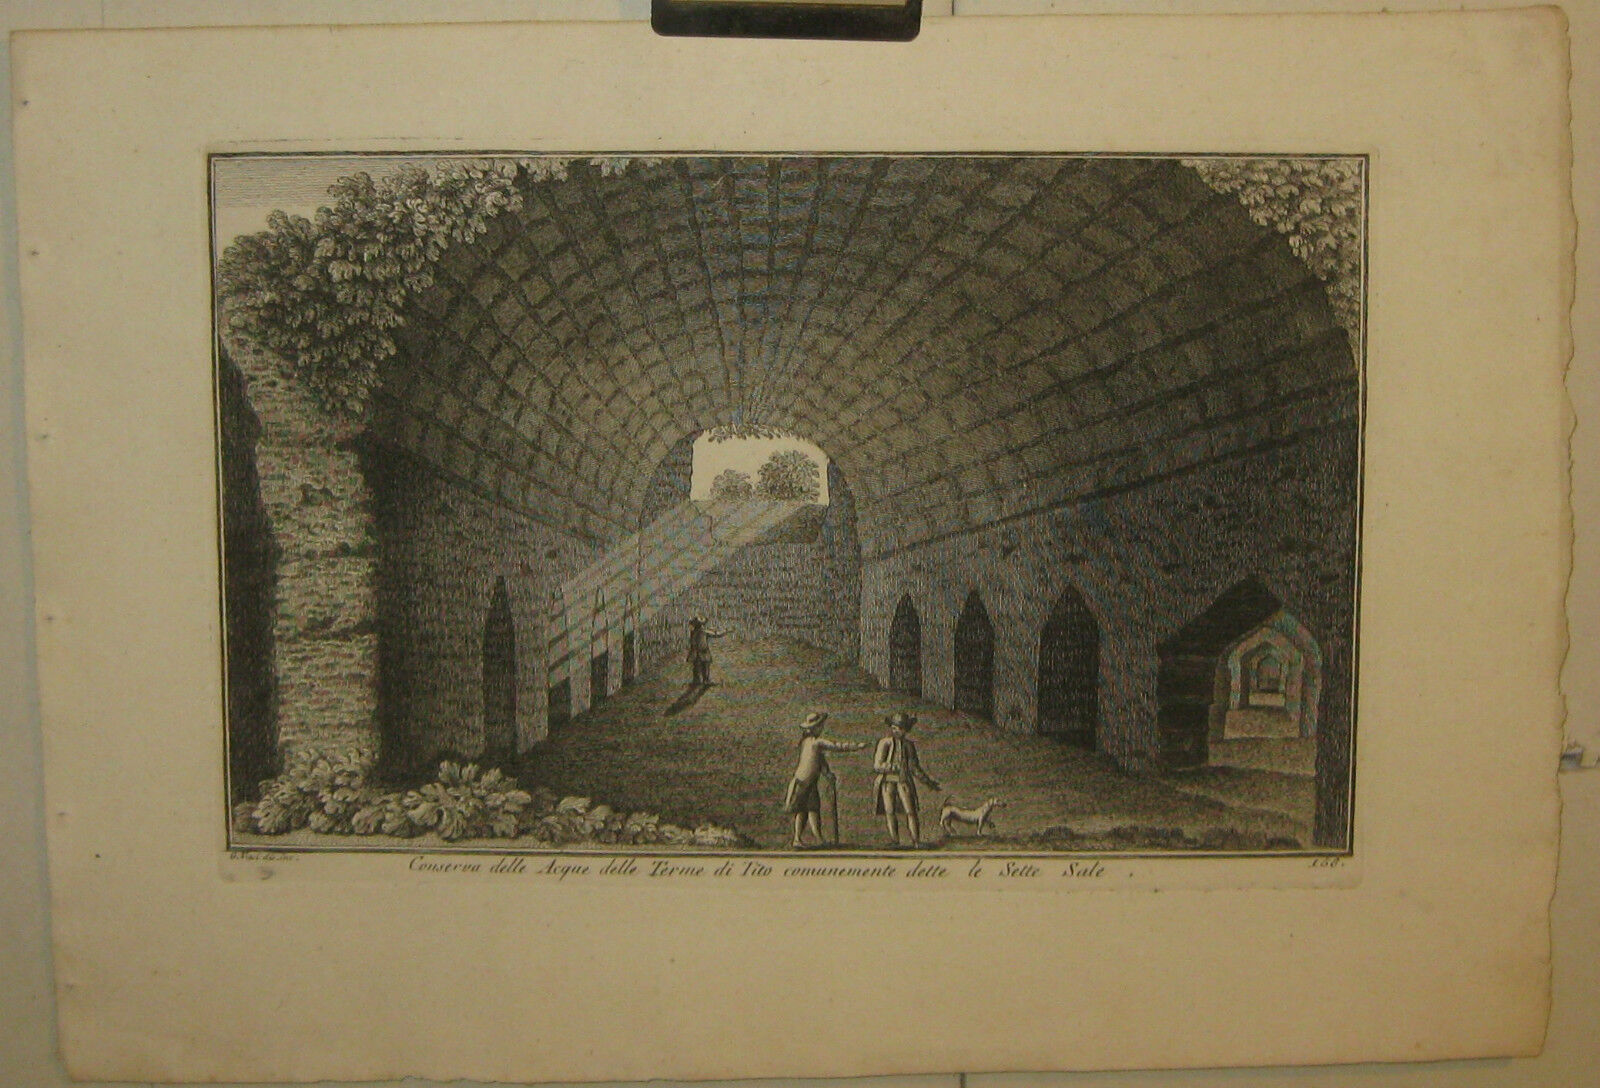 ANTIQUE GIUSEPPE VASI *BATHS OF TITUS* ROME WATER TUNNELS ARCHITECTURE ENGRAVING